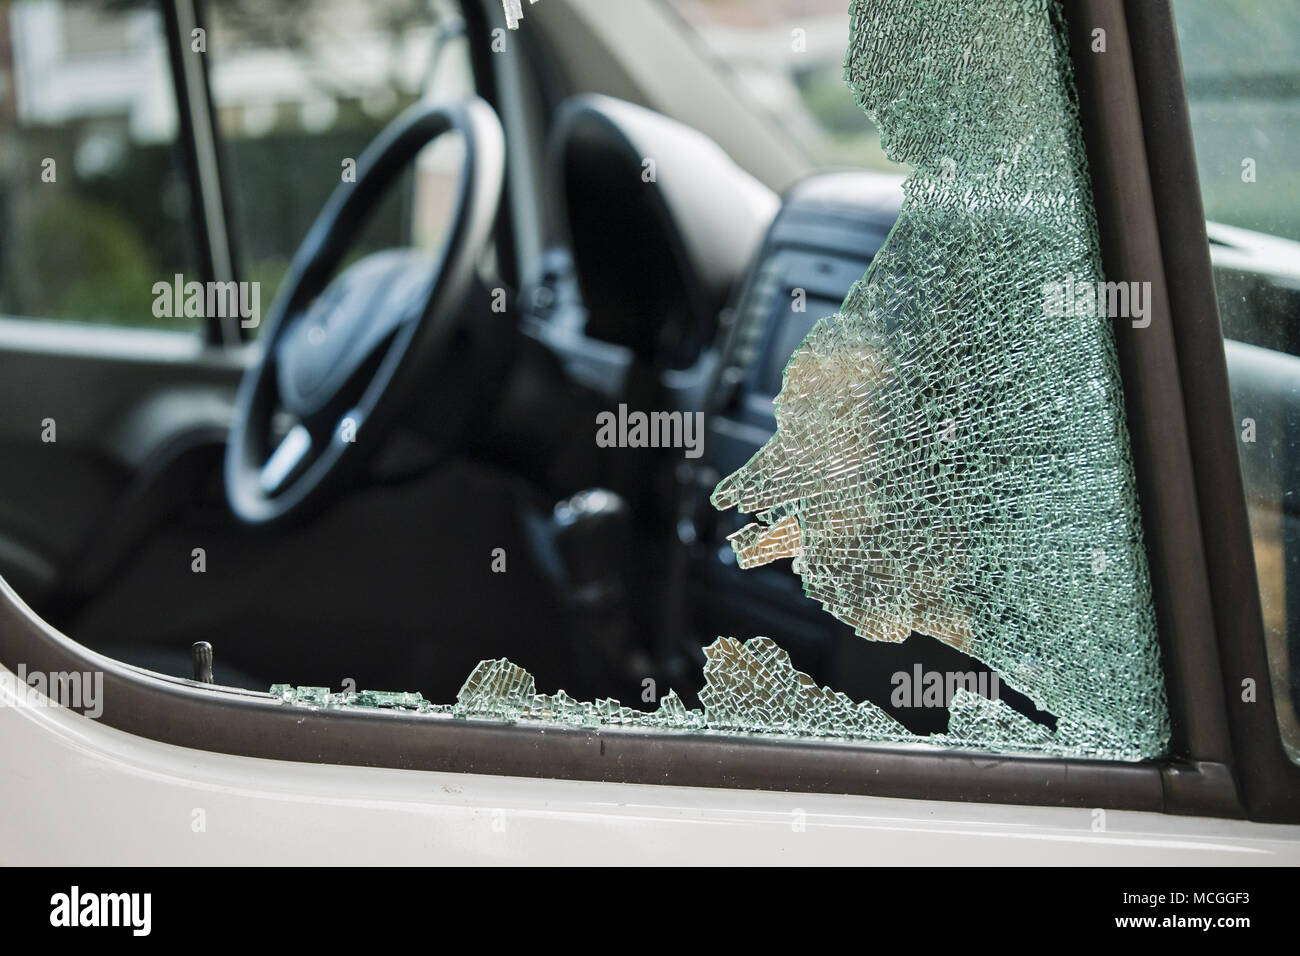 Vancouver, British Columbia, Canada. 30th Sep, 2017. A smashed van window: another ''smash and grab'' theft from a vehicle. Credit: Bayne Stanley/ZUMA Wire/Alamy Live News Stock Photo